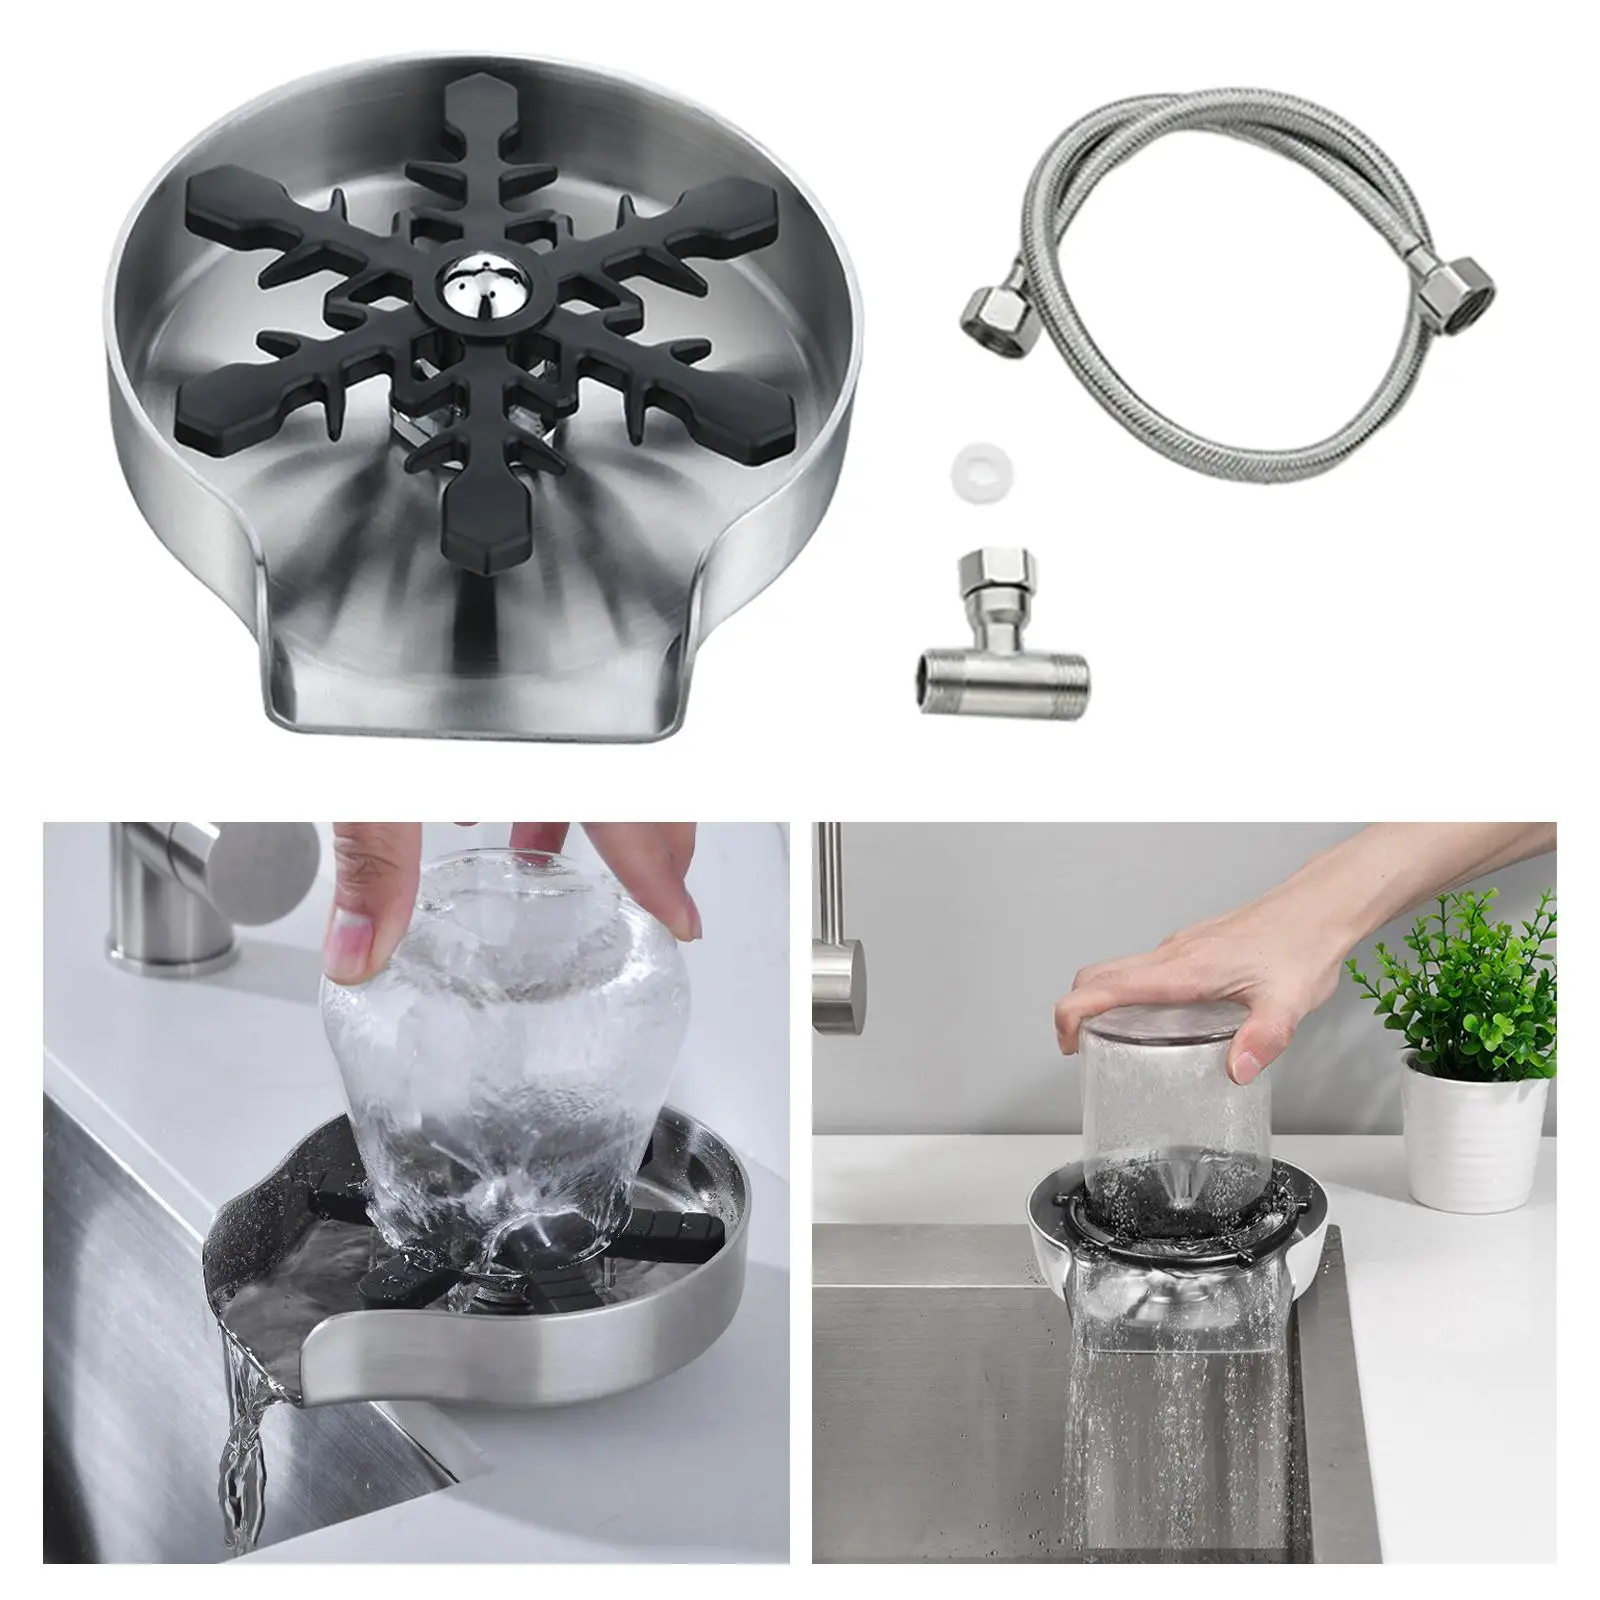 Automatic Cup Washer Cleaning Accessories Faucet Glass Washer Cleaner Durable Sinks Glass Washer for Home Restaurant Bar Tea Cup